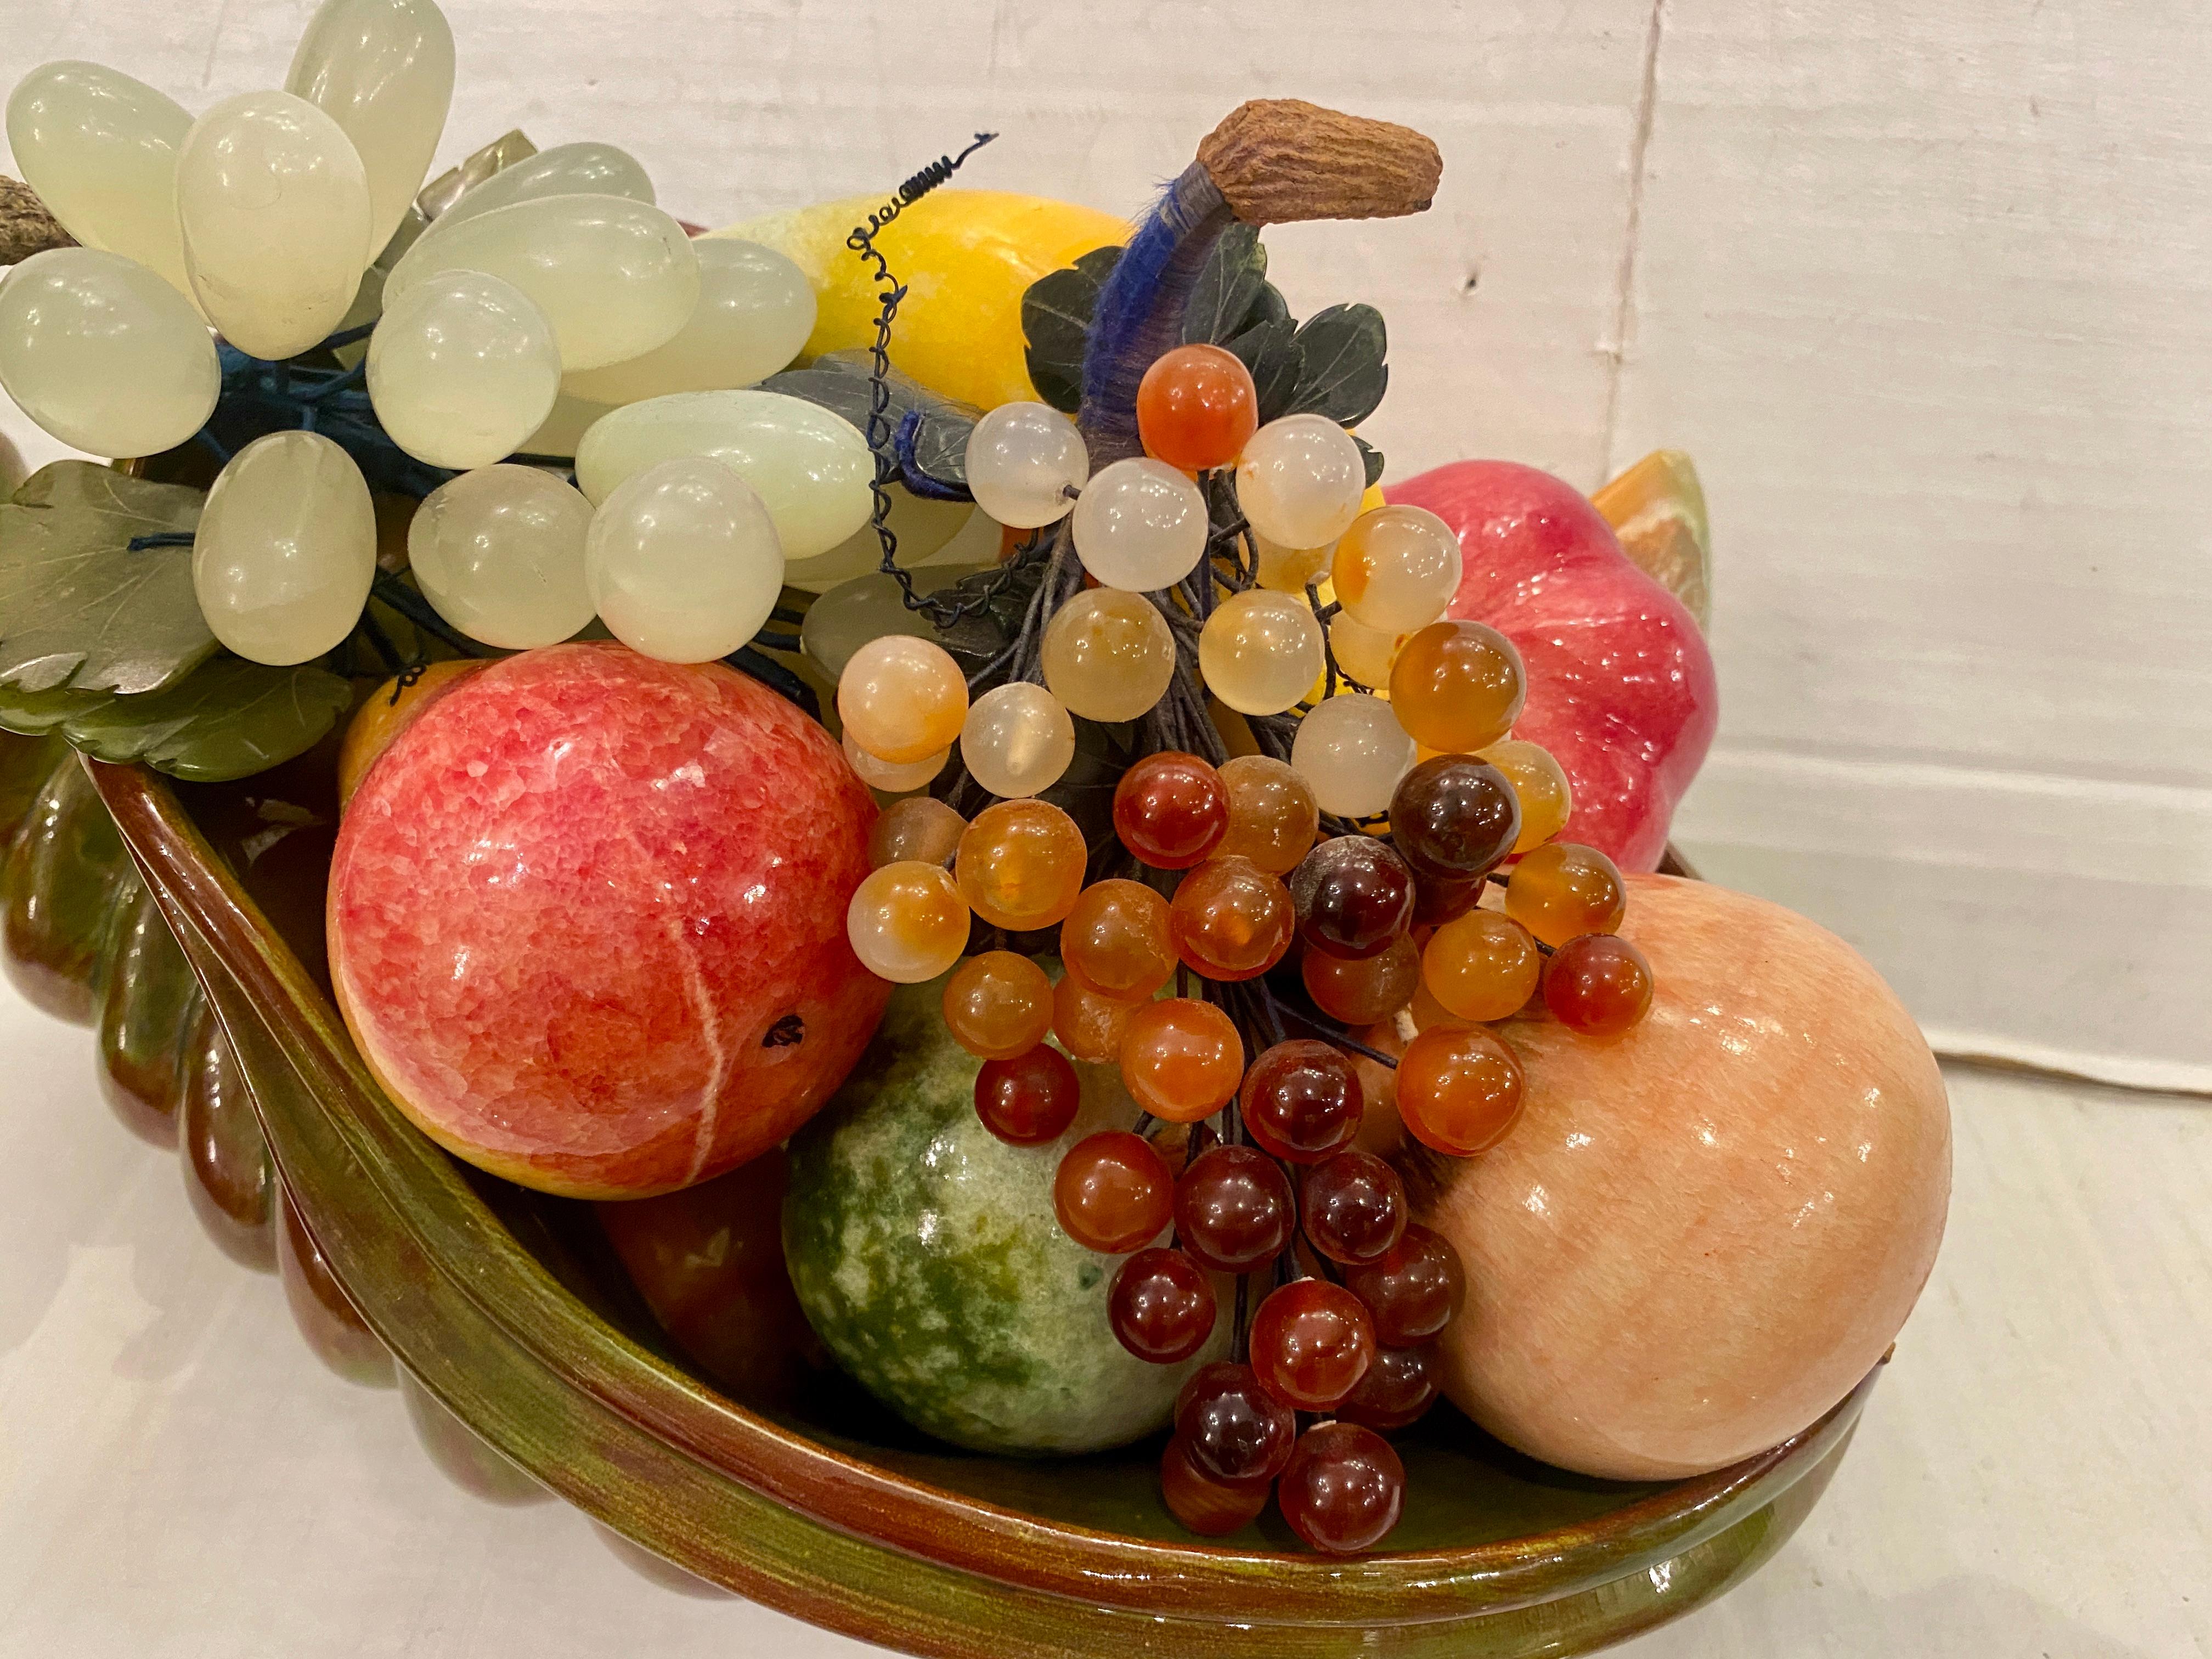 A set of circa 1950's Italian alabaster, jadeite and other stones carved into fruit in a glazed porcelain cornucopia. Sold as one item.

Measurements:
Length: 15